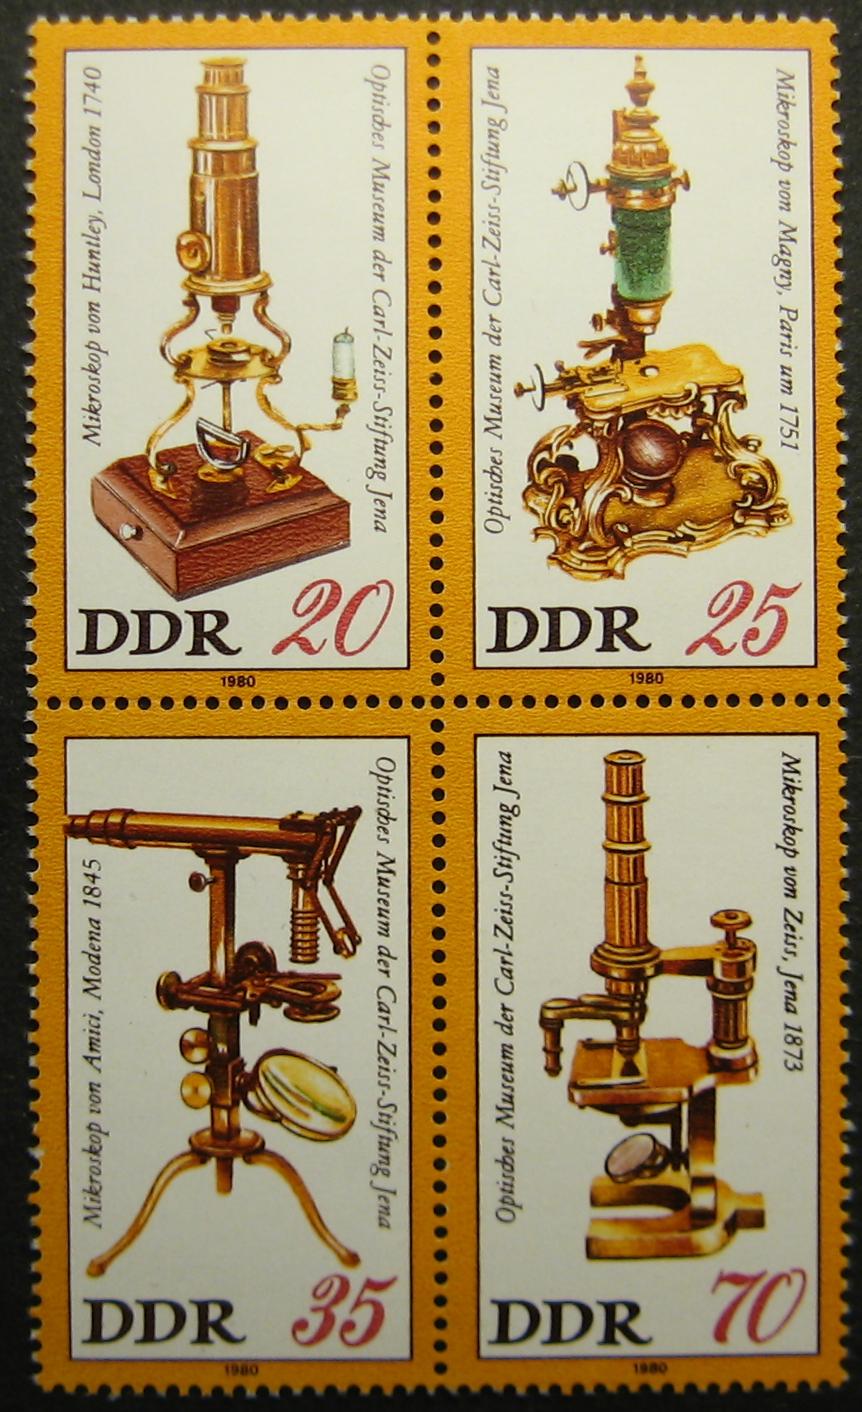 German postage stamps depicting four antique microscopes. Advancements in microscopy were essential to the early study of infectious diseases.